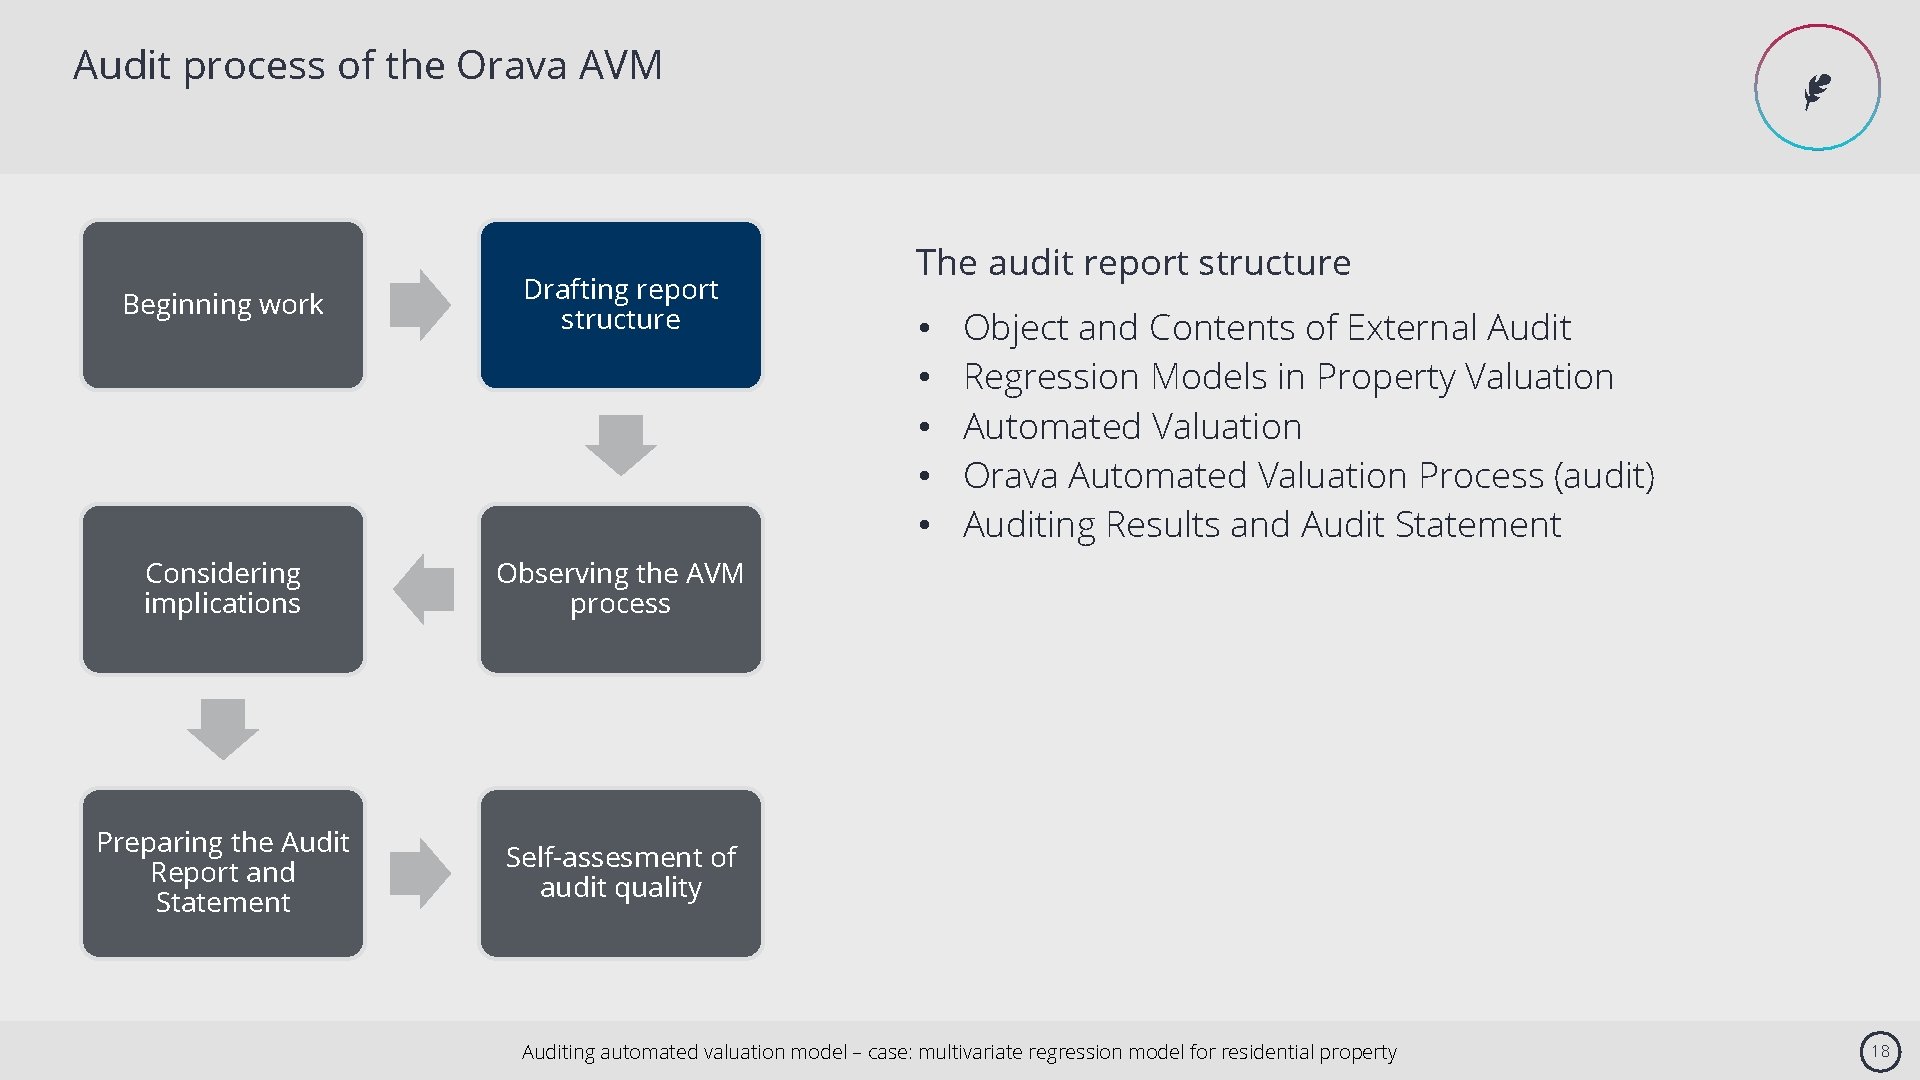 Audit process of the Orava AVM Beginning work Drafting report structure Considering implications Observing